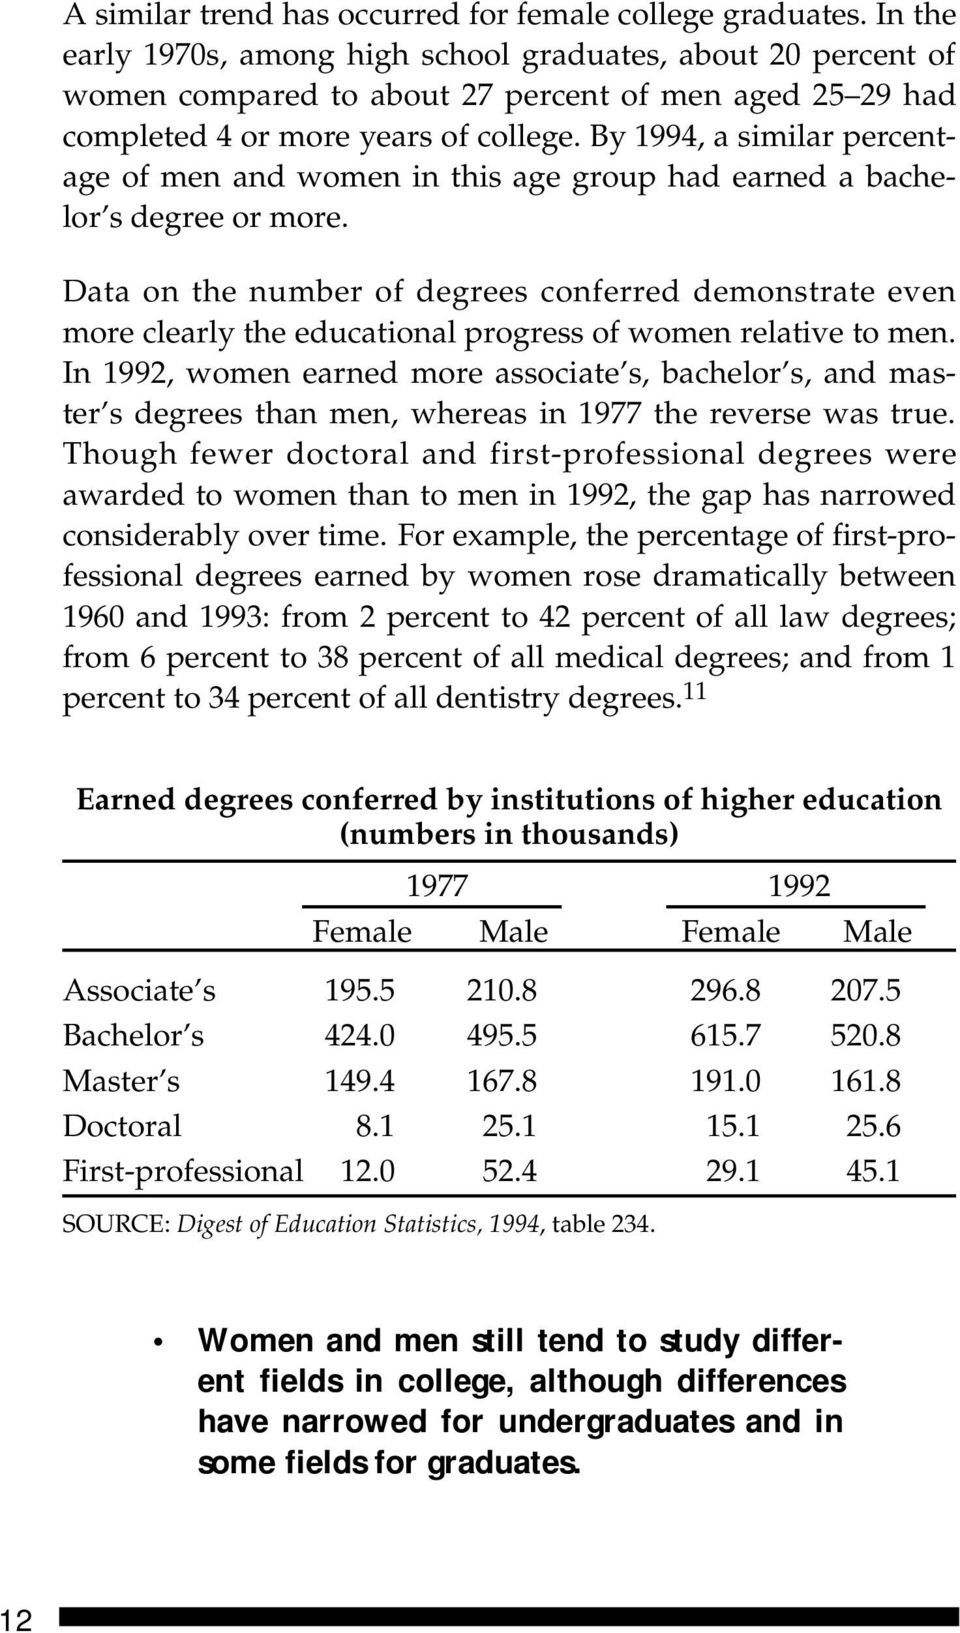 By 1994, a similar percentage of men and women in this age group had earned a bachelor s degree or more.